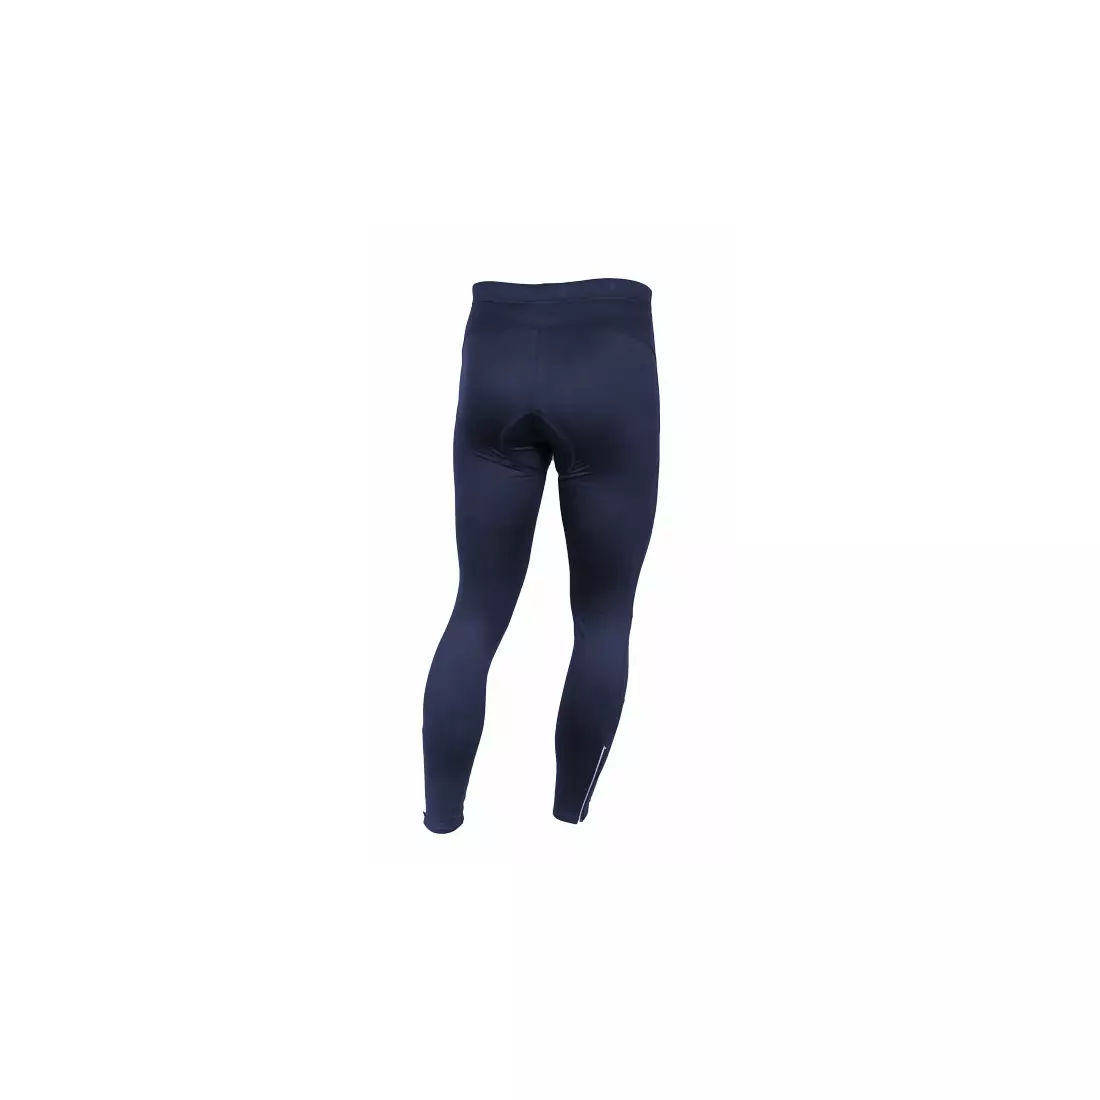 CRIVIT - insulated cycling pants with insert - navy blue